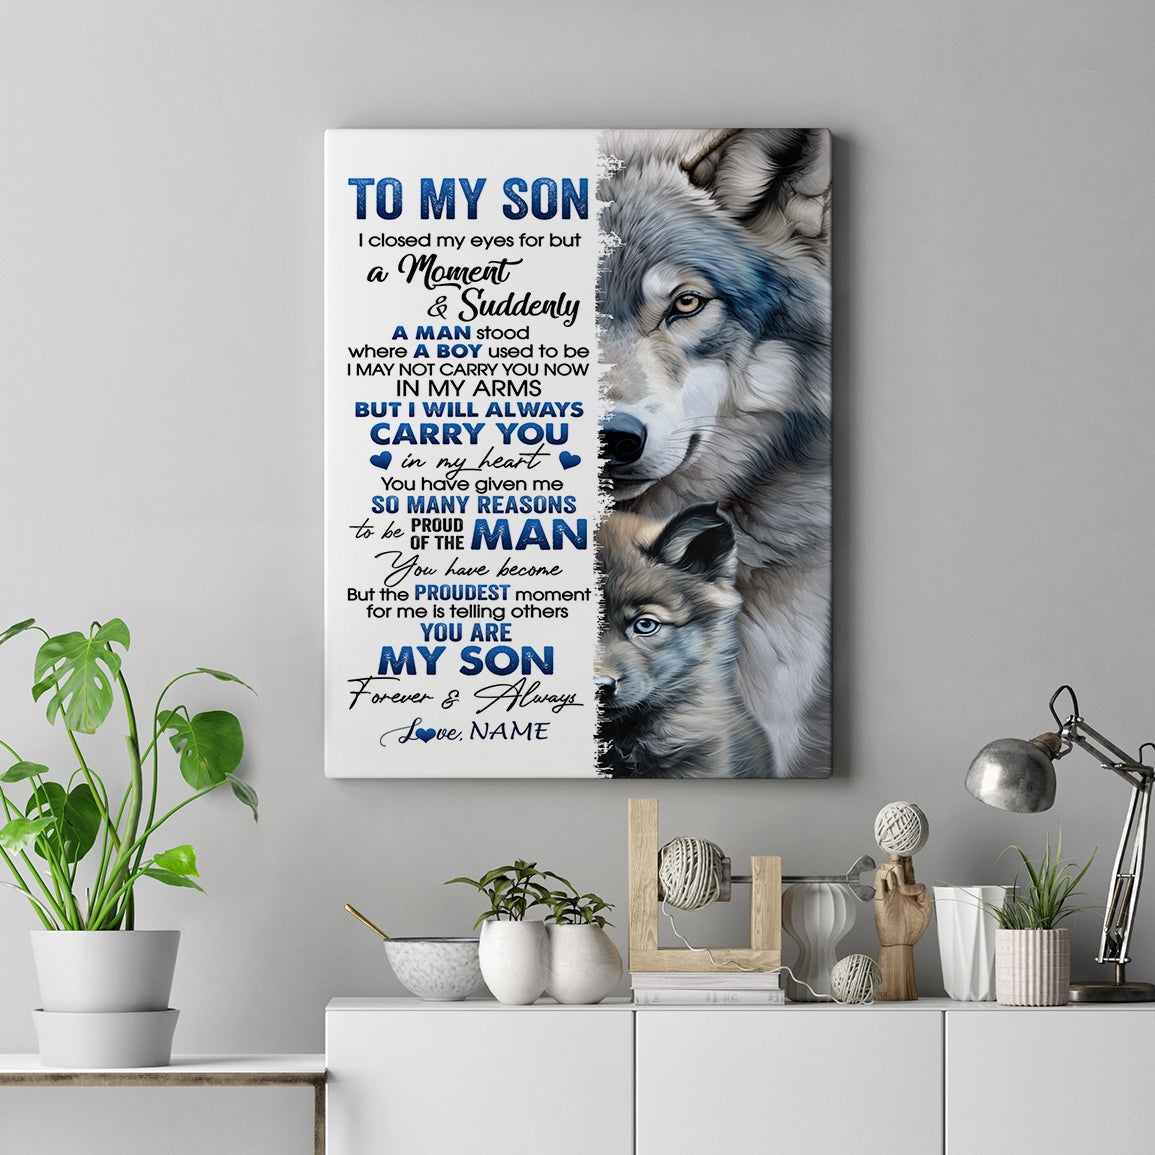 Personalized_To_My_Son_Canvas_From_Mom_Dad_Mother_I_Close_My_Eyes_For_But_A_Moment_Wolf_Son_Birthday_Gifts_Graduation_Christmas_Custom_Wall_Art_Print_Framed_Canvas_Canvas_mockup_1.jpg